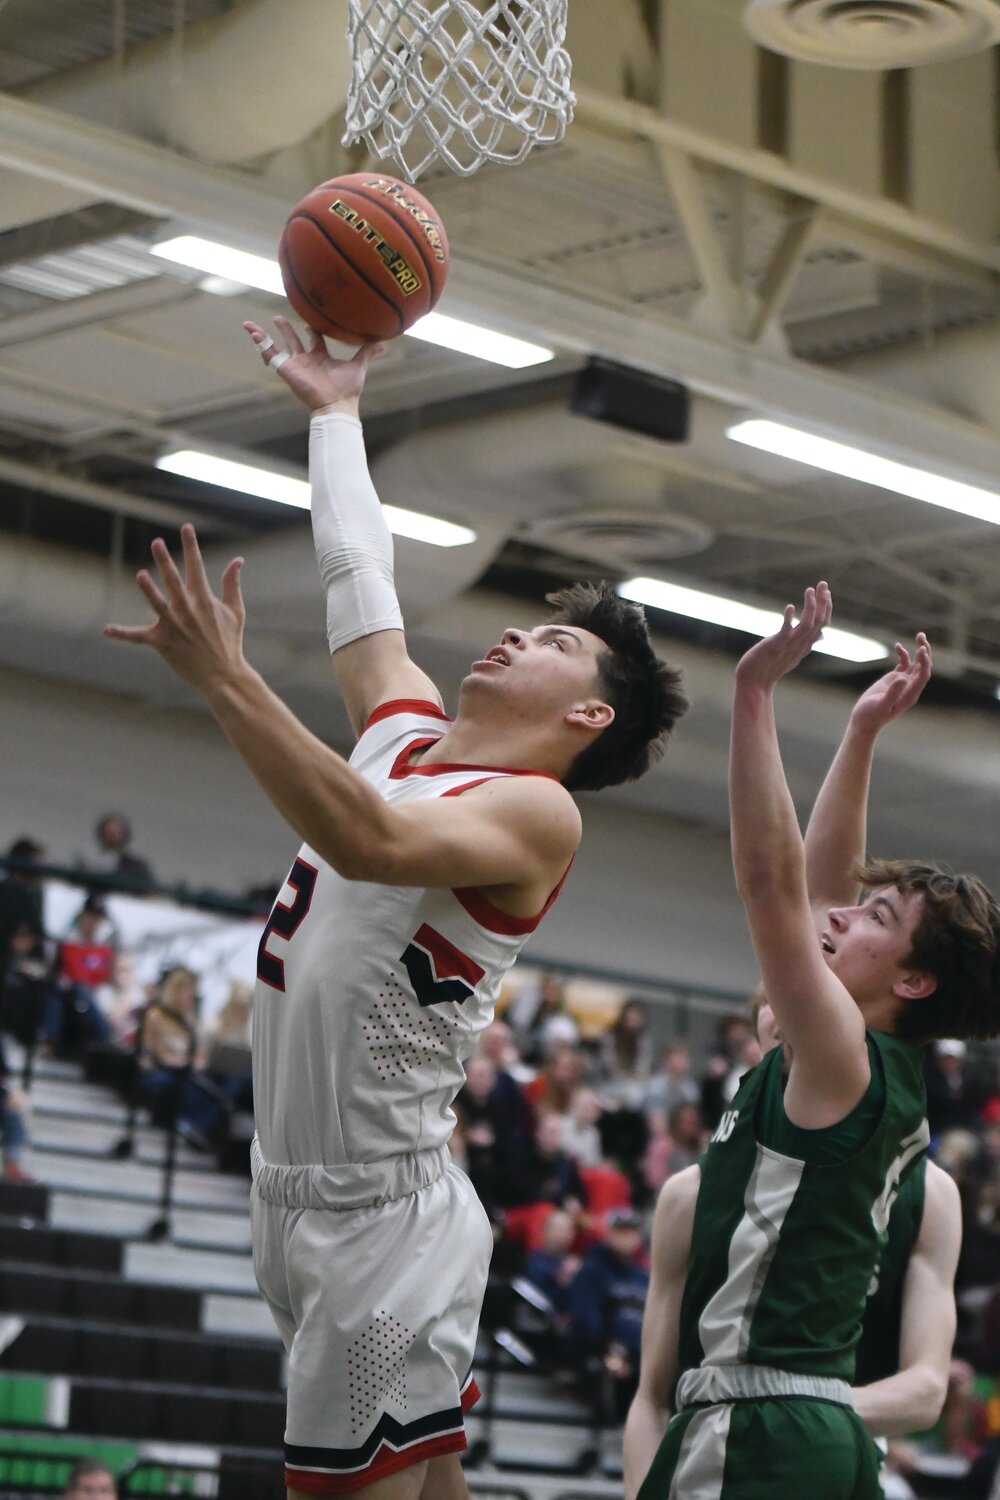 Senior Cohen Morrow makes a strong move to the basket during Friday’s 51-38 win over Kelly Walsh.